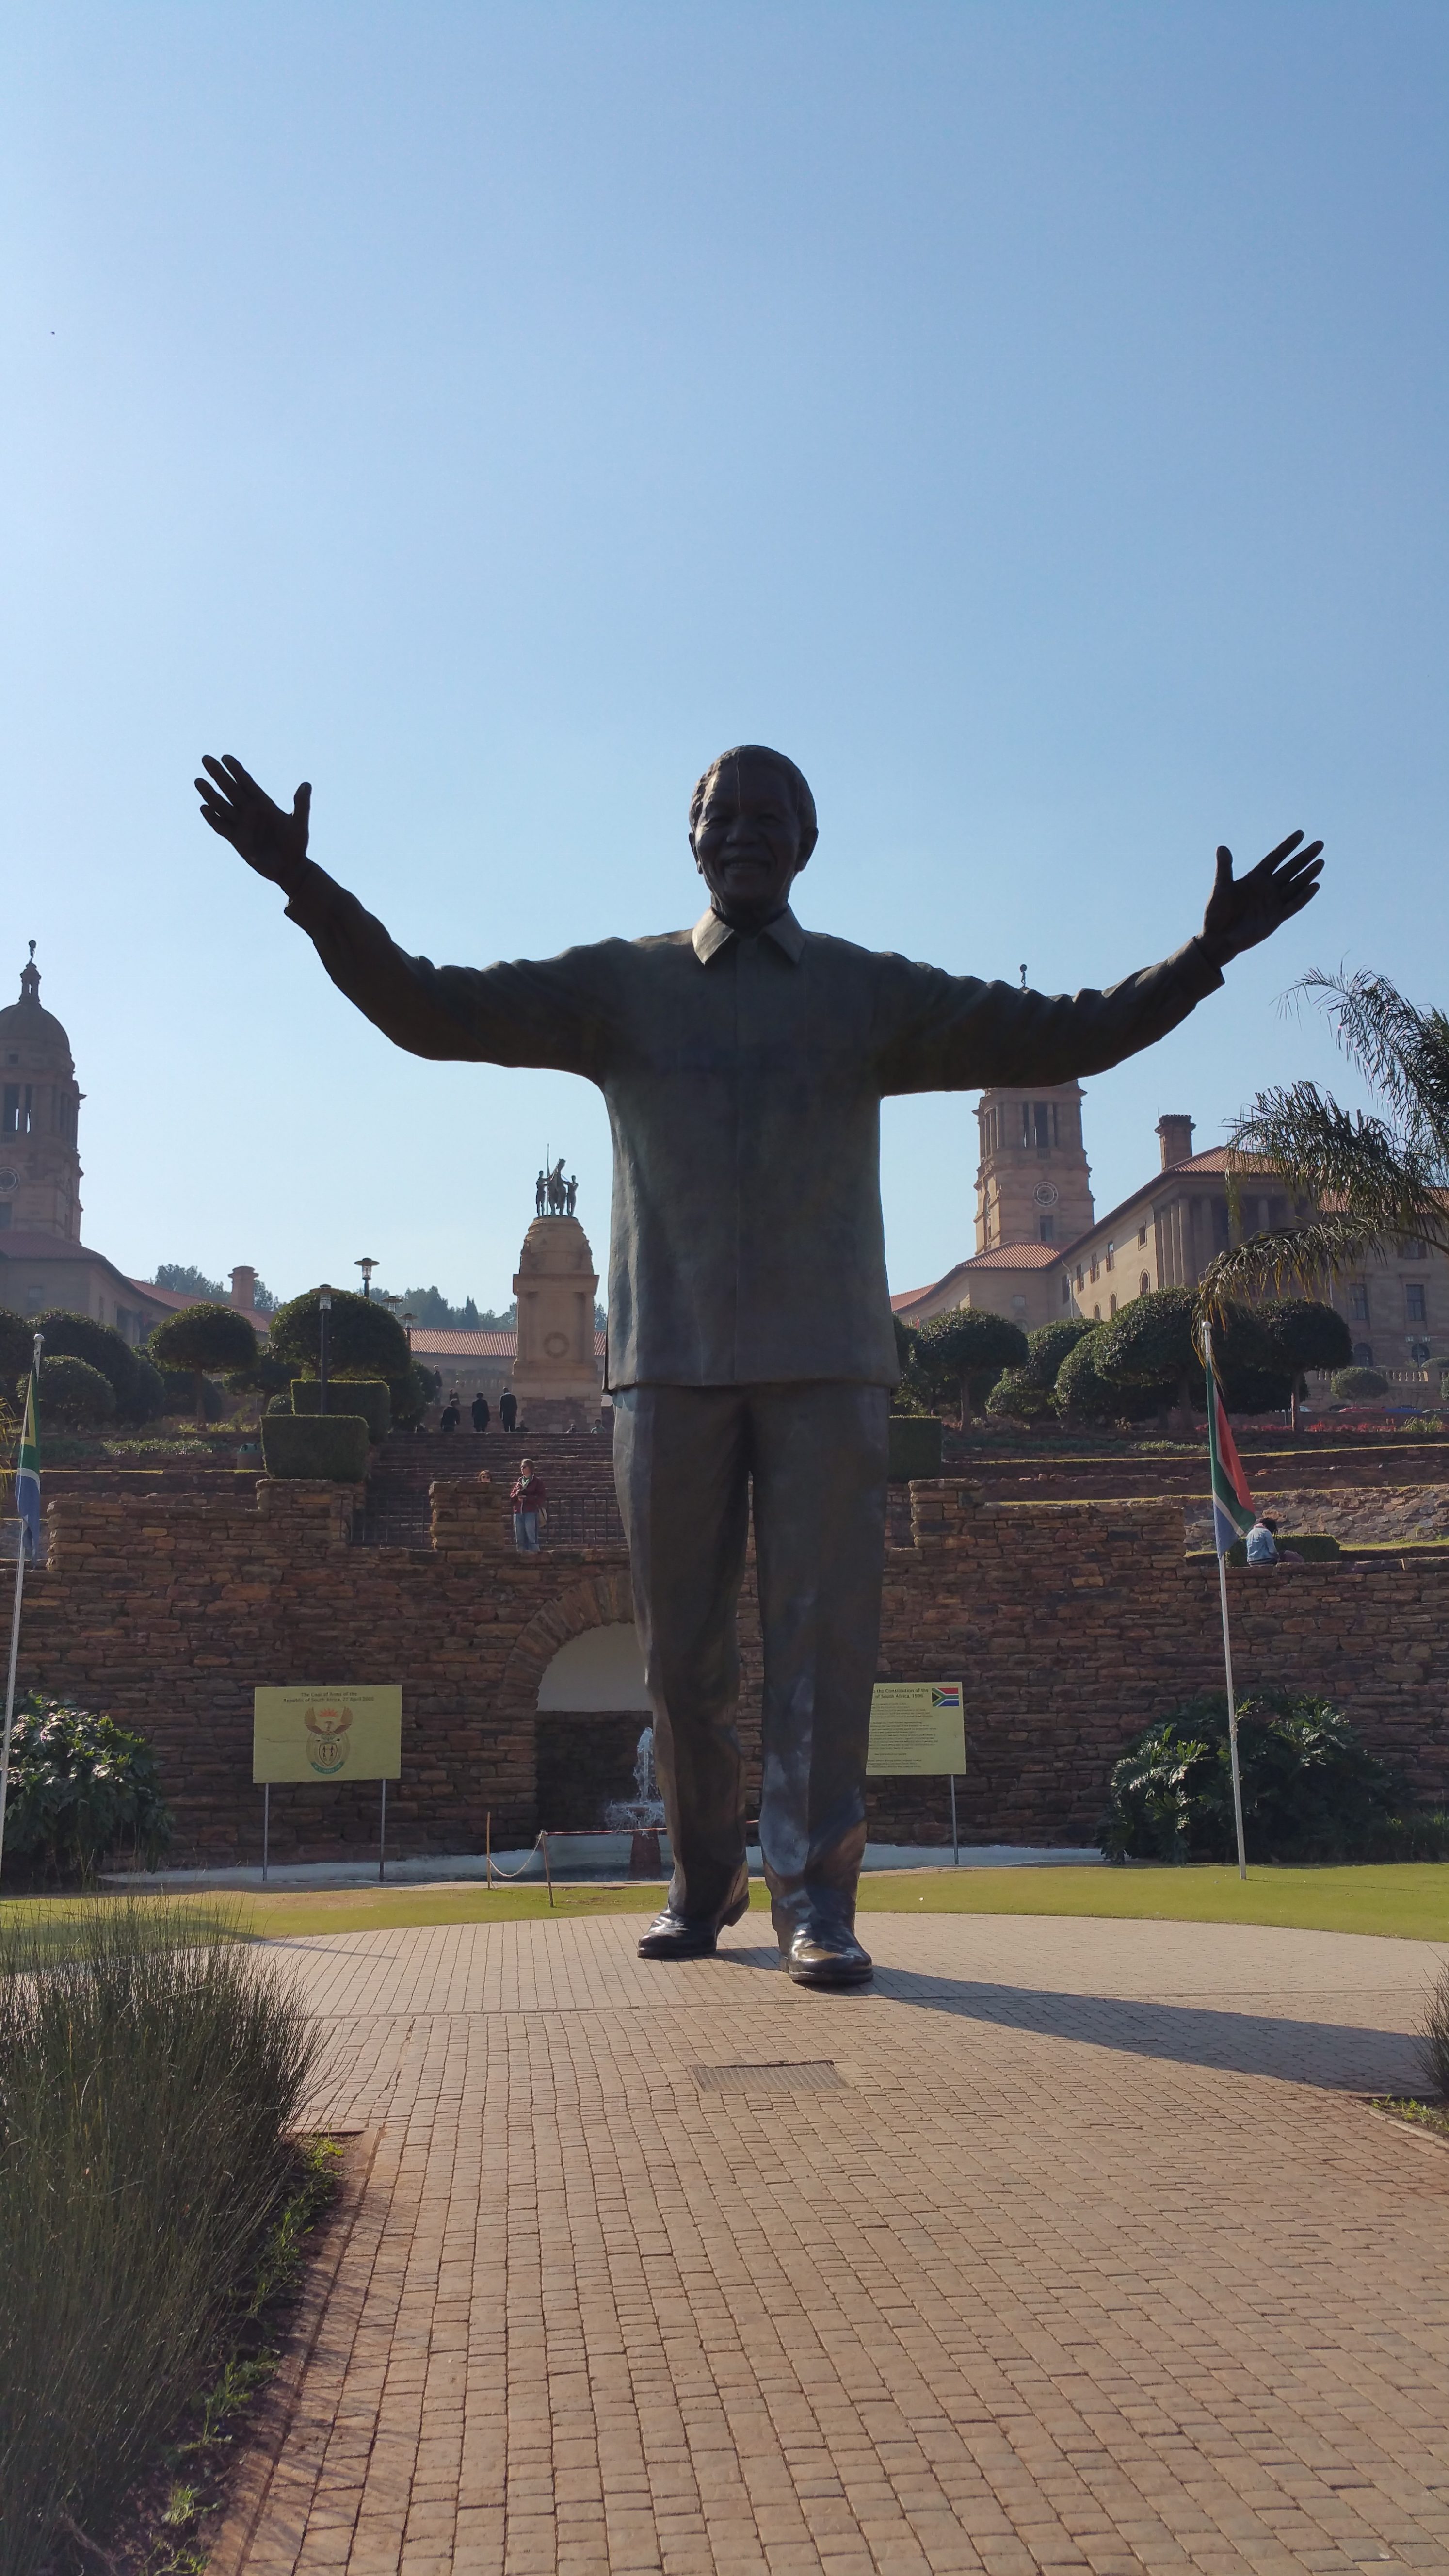 Statue of Nelson Mandela, the first president of post-apartheid South Africa. 